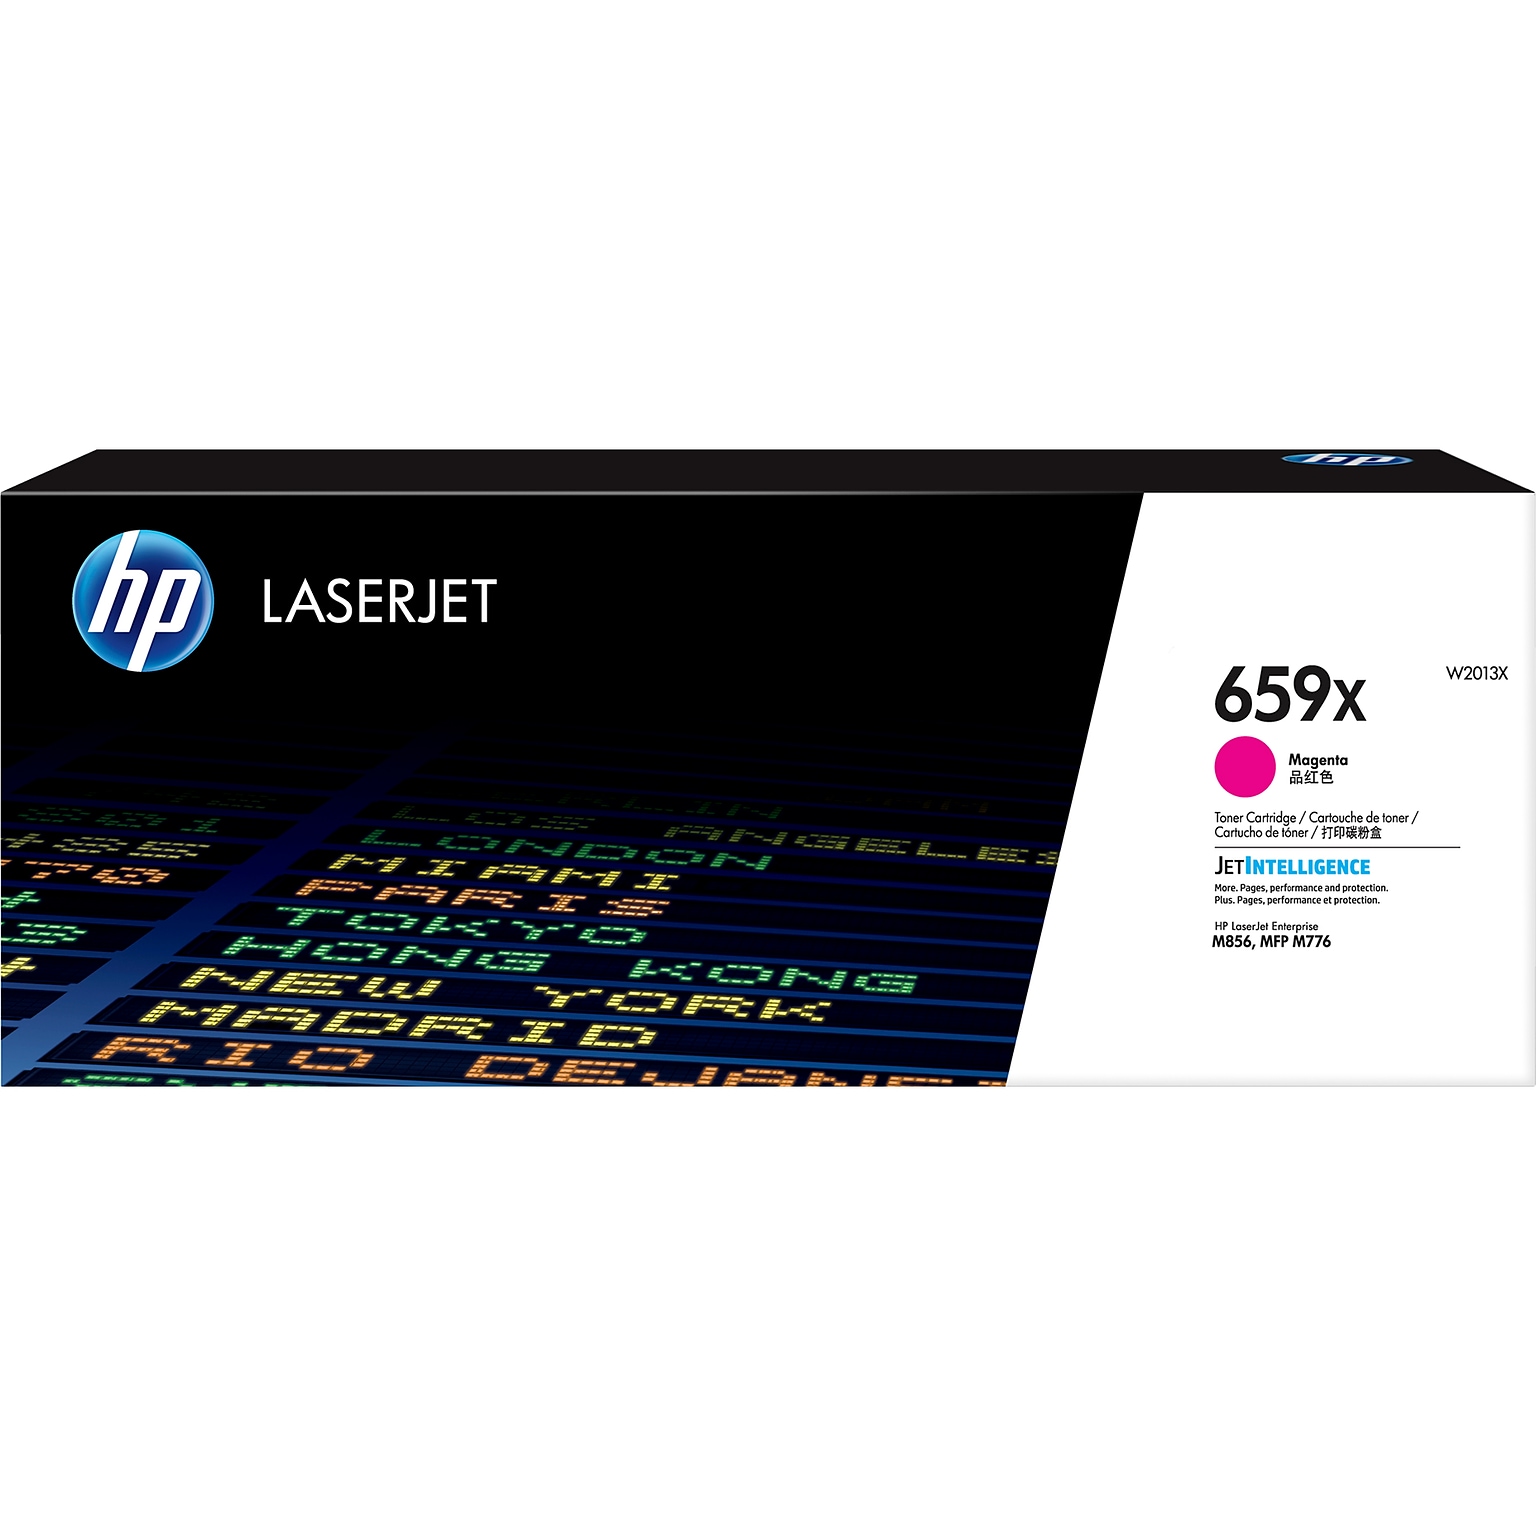 HP 659X Magenta High Yield Toner Cartridge, Prints Up to 29,000 Pages (W2013X)